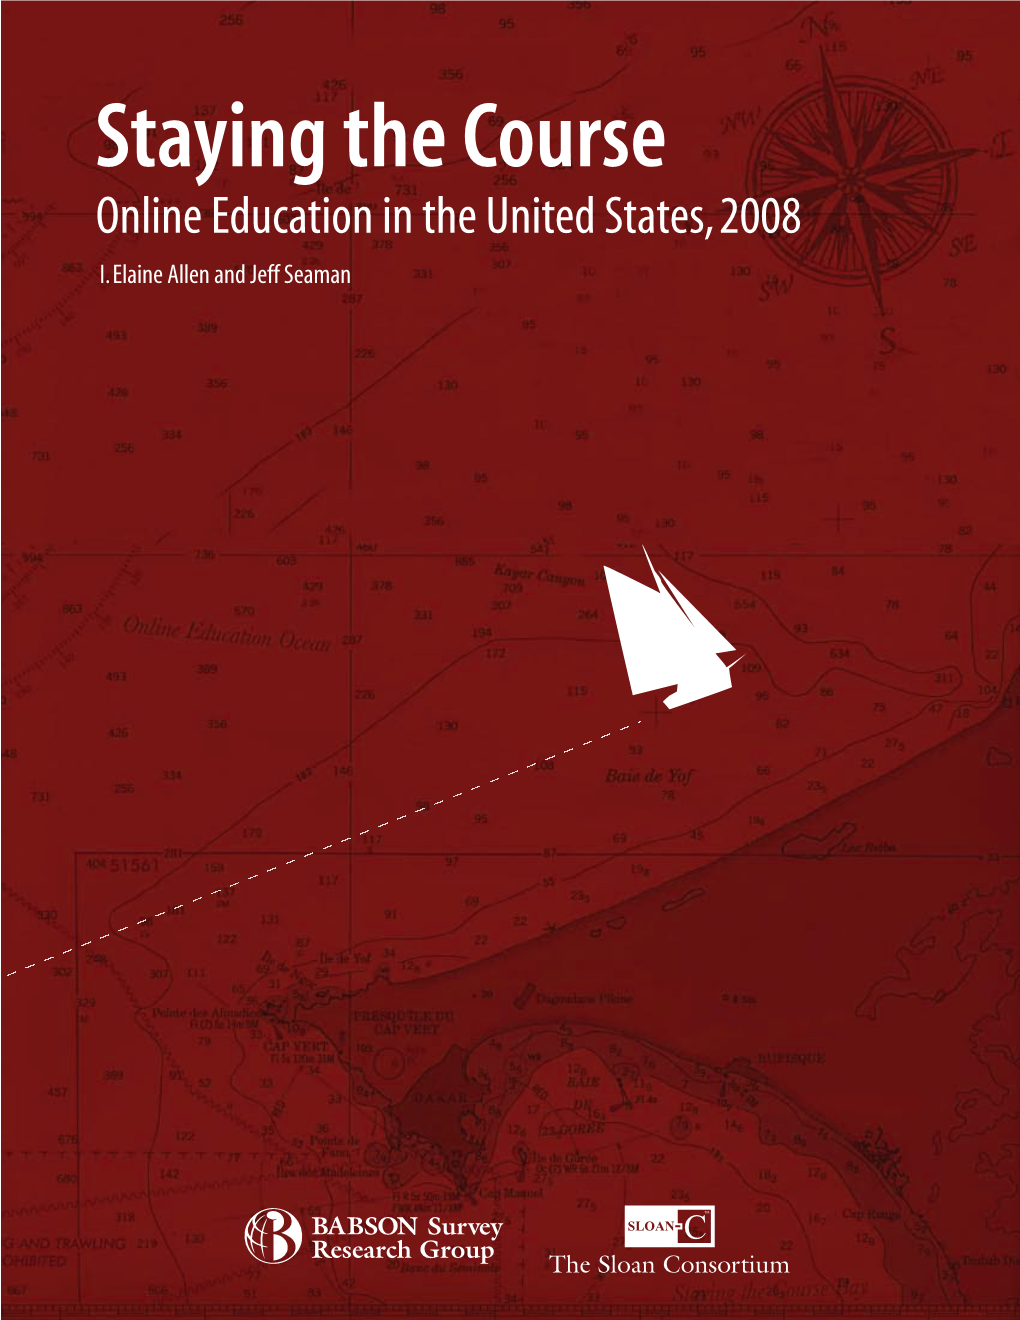 Staying the Course Online Education in the United States, 2008